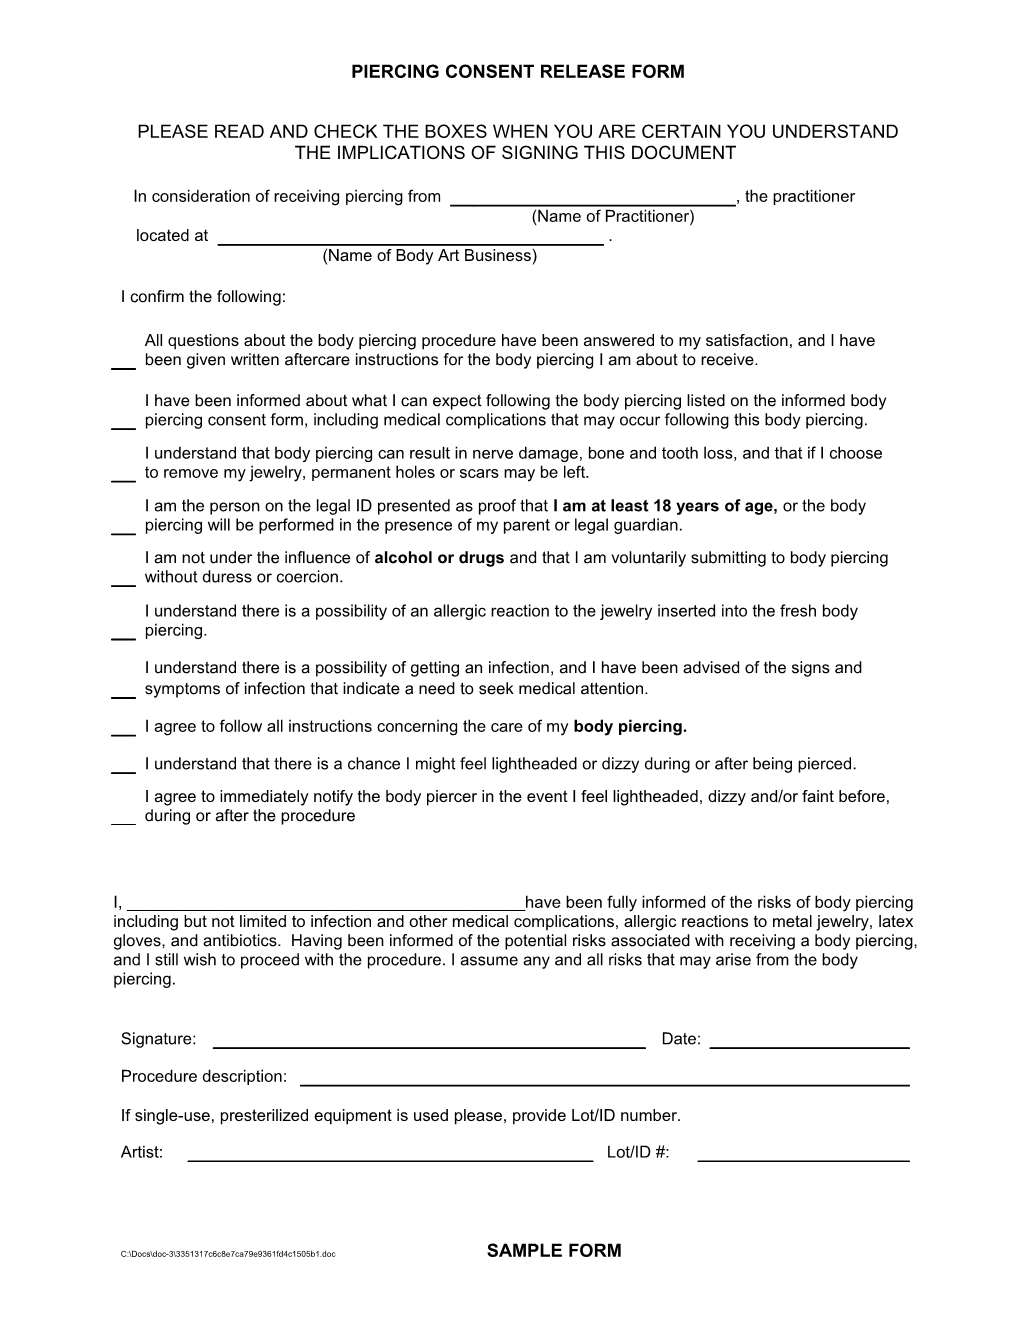 Piercing Consent Release Form